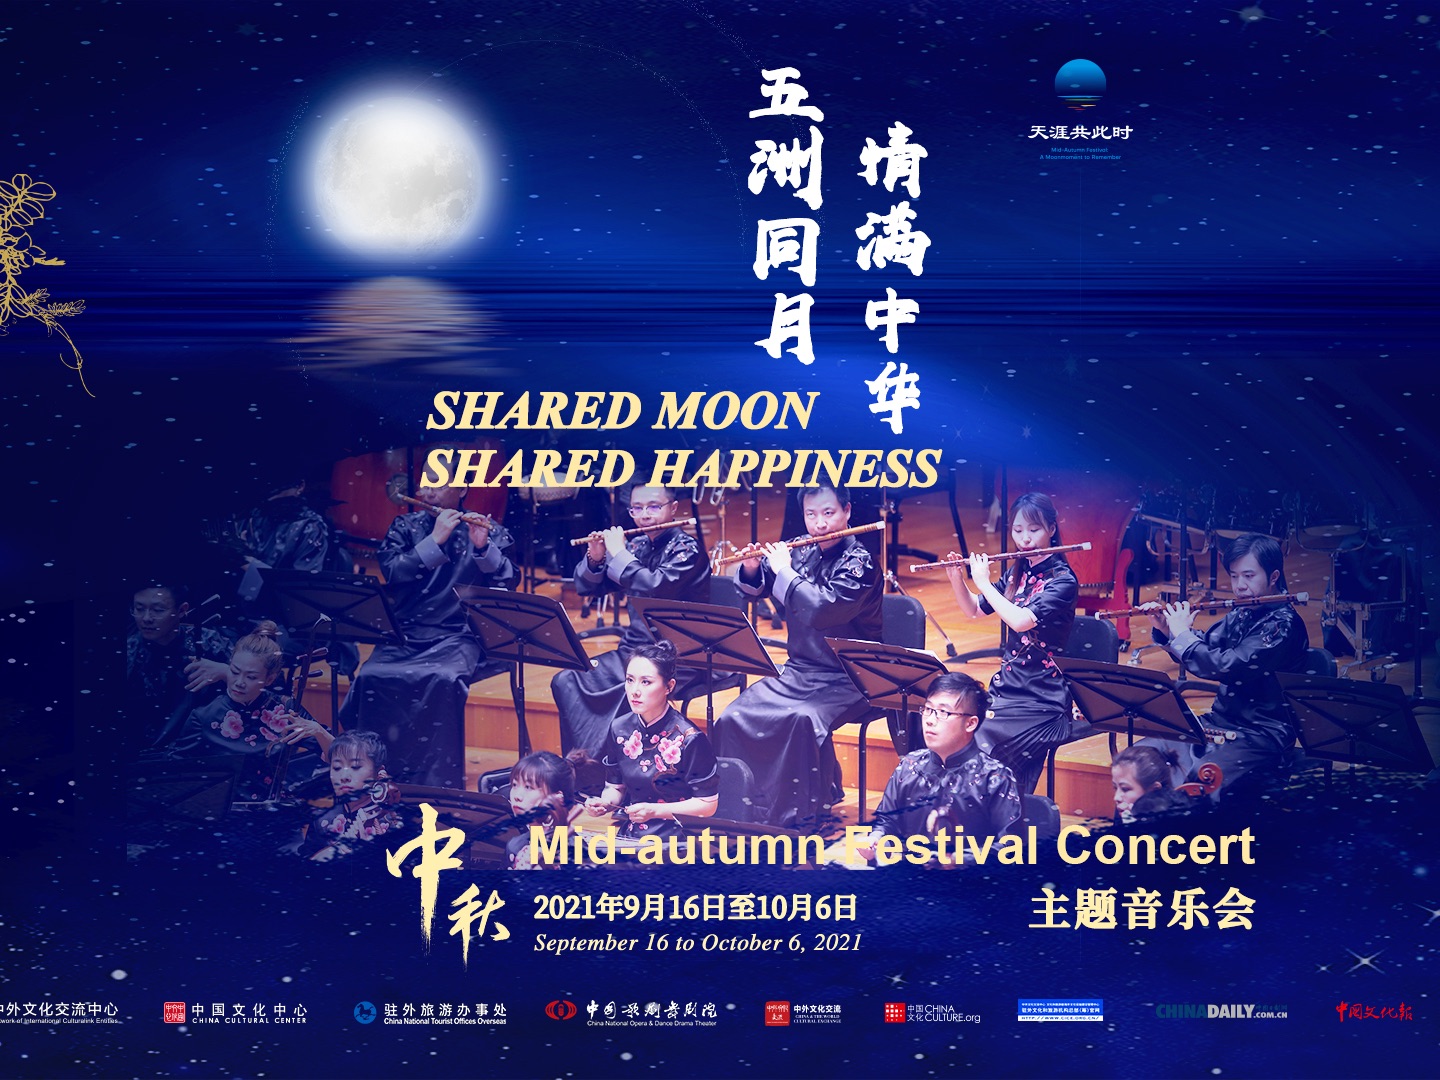 “Shared Moon, Shared Happiness” – Mid-autumn Festival Concert